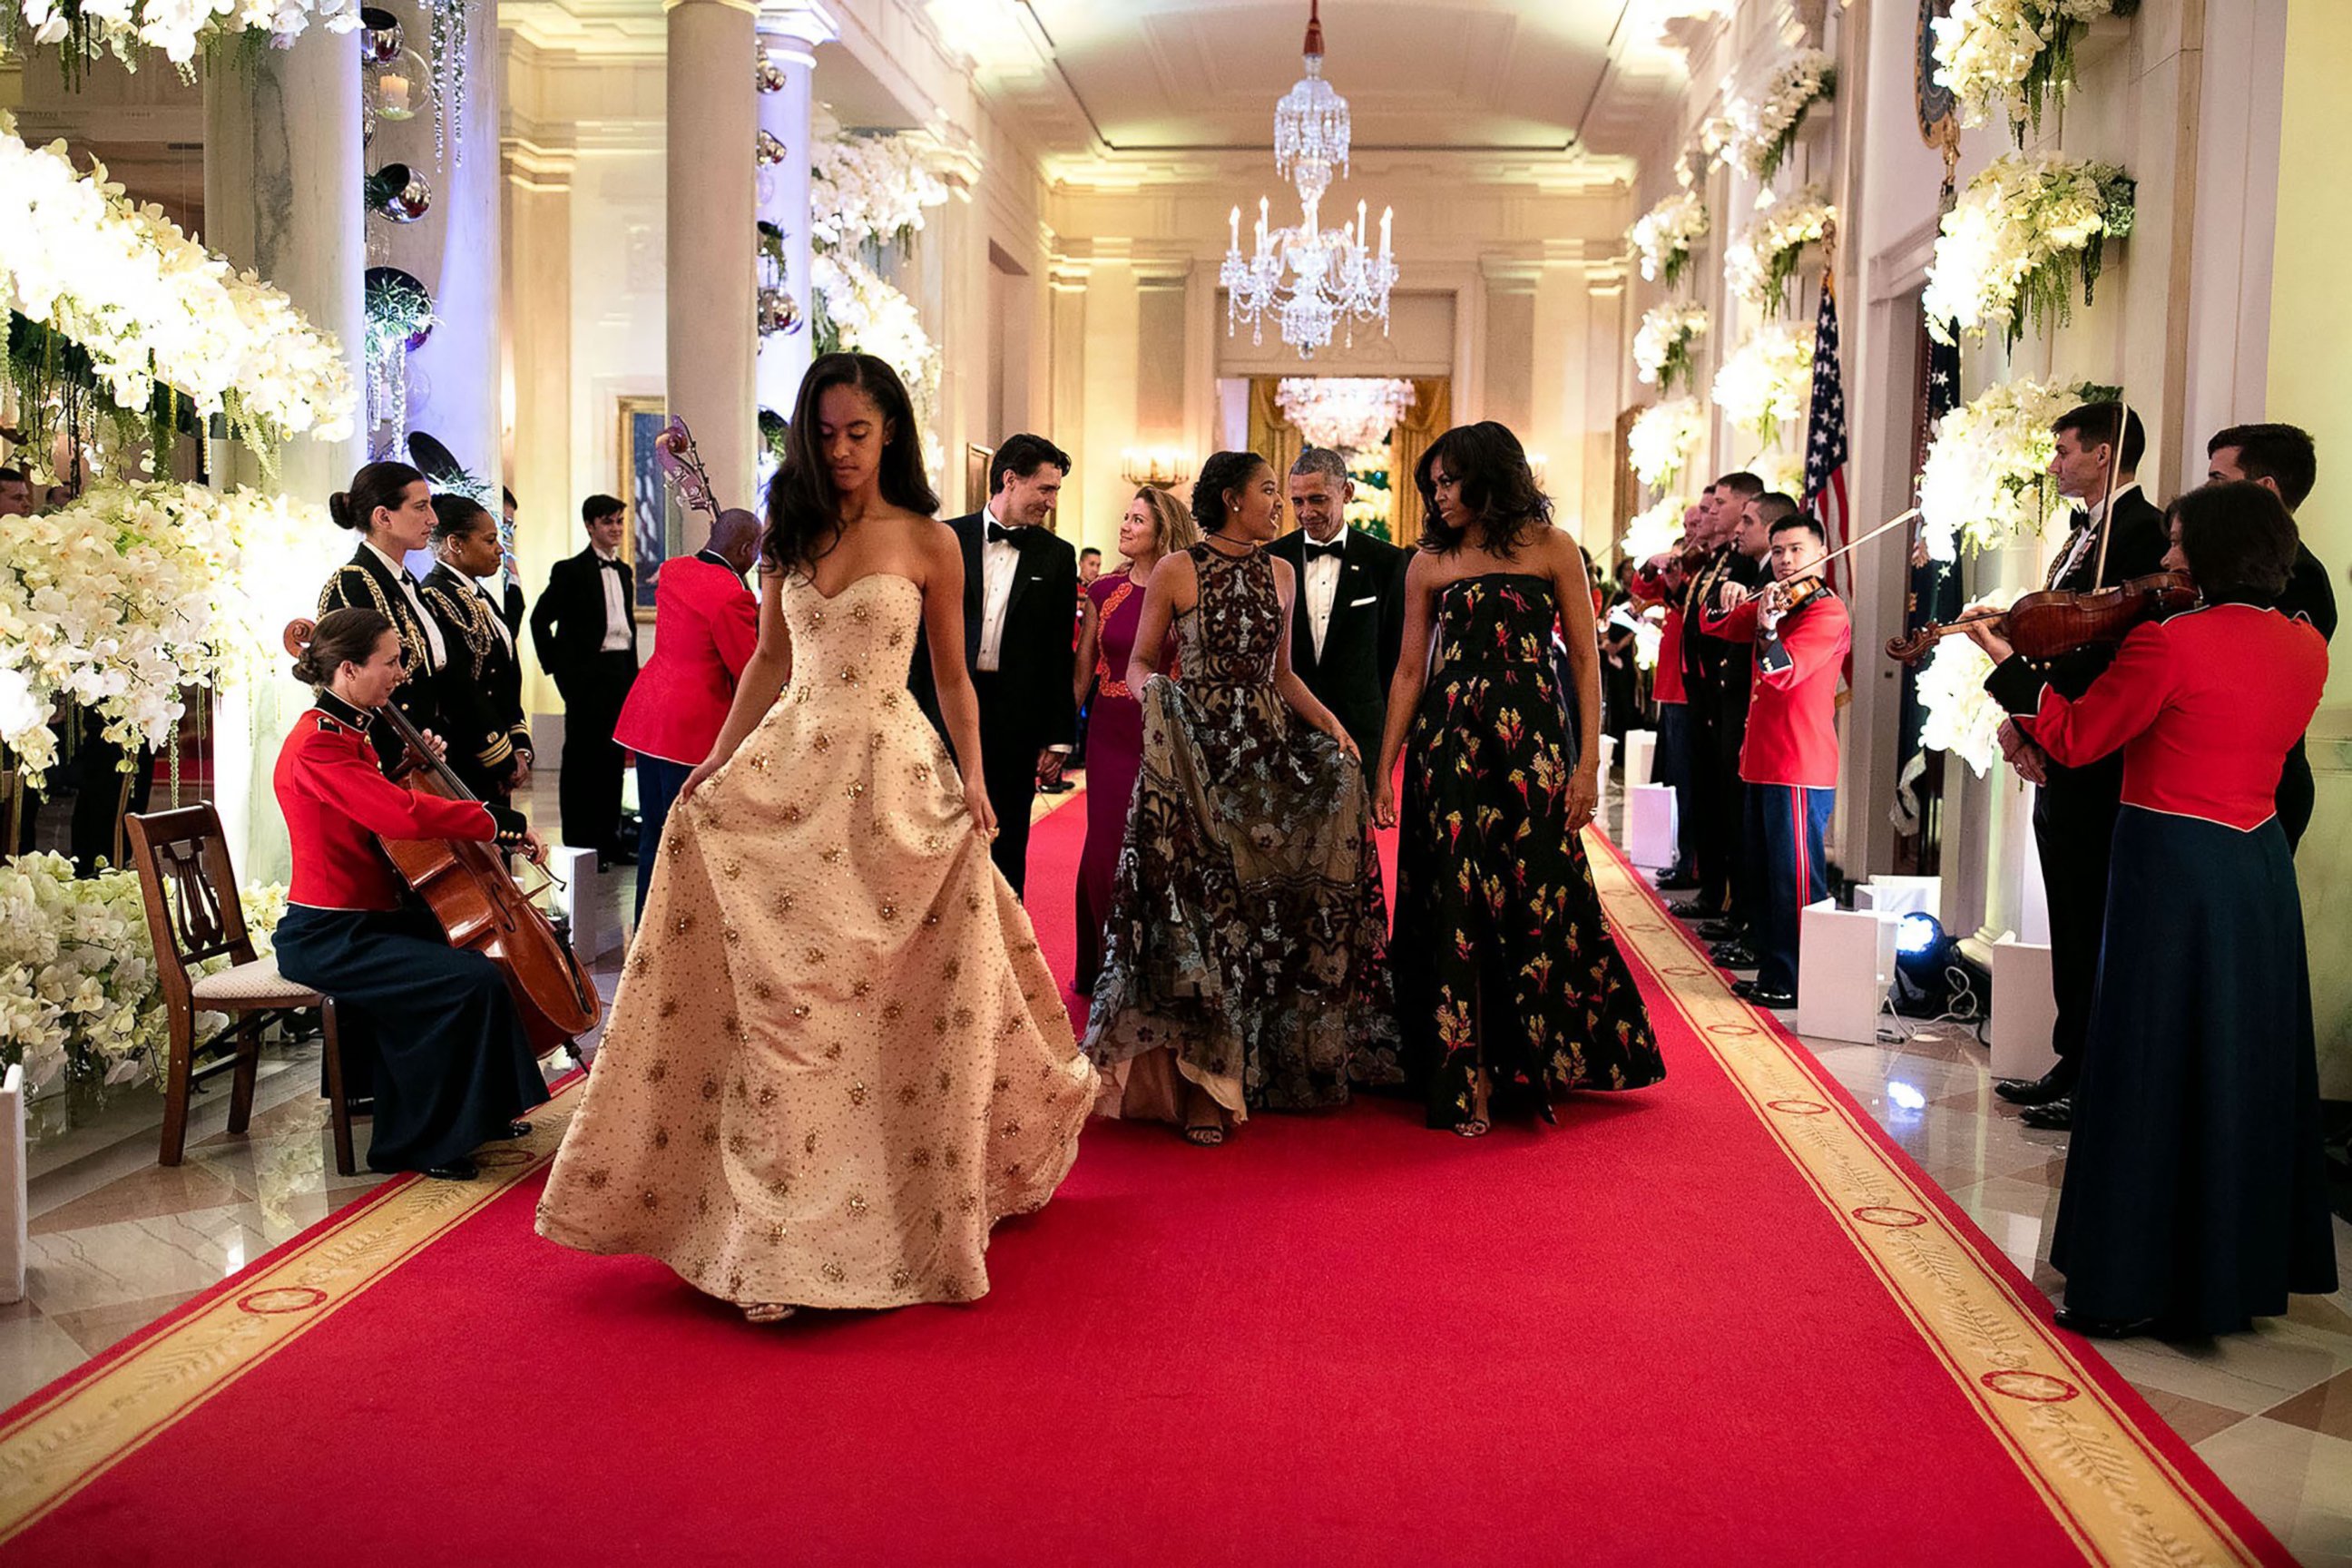 PHOTO: Malia and Sasha walk with their parents down the Great Hall in the White House as they attend their first state dinner, March 10, 2016.